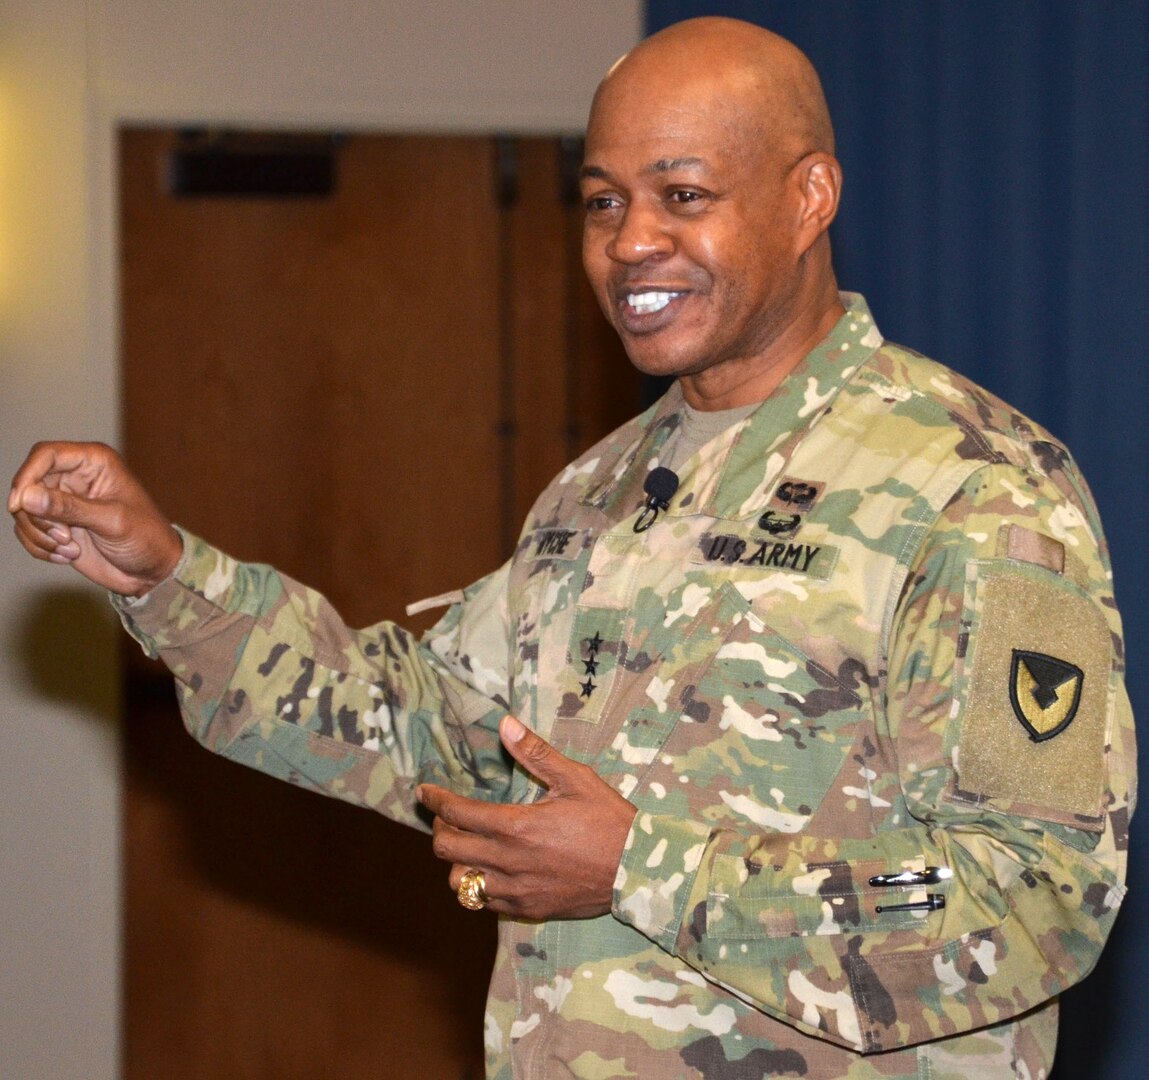 Lt. Gen. Larry Wyche speaks with leaders from throughout the Mission and Installation Contracting Command as part of an acquisition leadership training event Dec. 7, 2016, at Joint Base San Antonio-Fort Sam Houston. Wyche spent the day in San Antonio meeting with installation leaders from JBSA-Fort Sam Houston and industry partners. Wyche is the deputy commanding general for the U.S. Army Materiel Command at Redstone Arsenal, Ala.